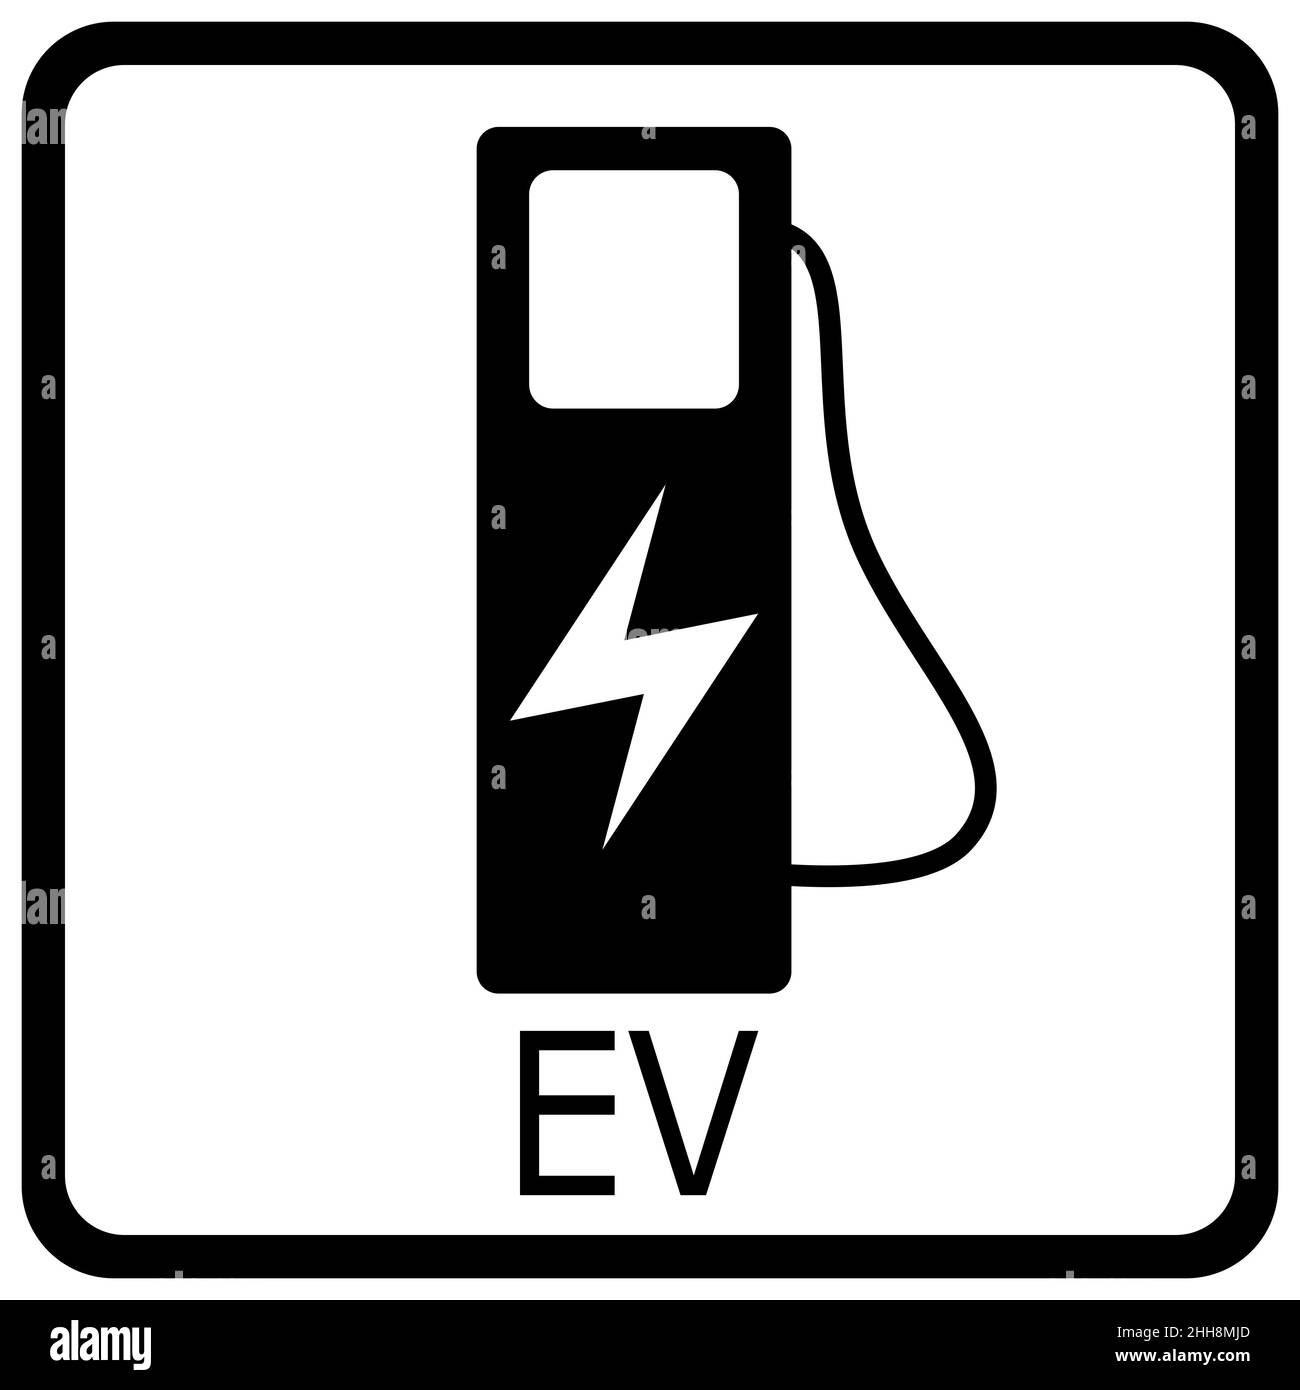 Vector illustration of a white traffic sign for charging electric cars with green energy Stock Photo